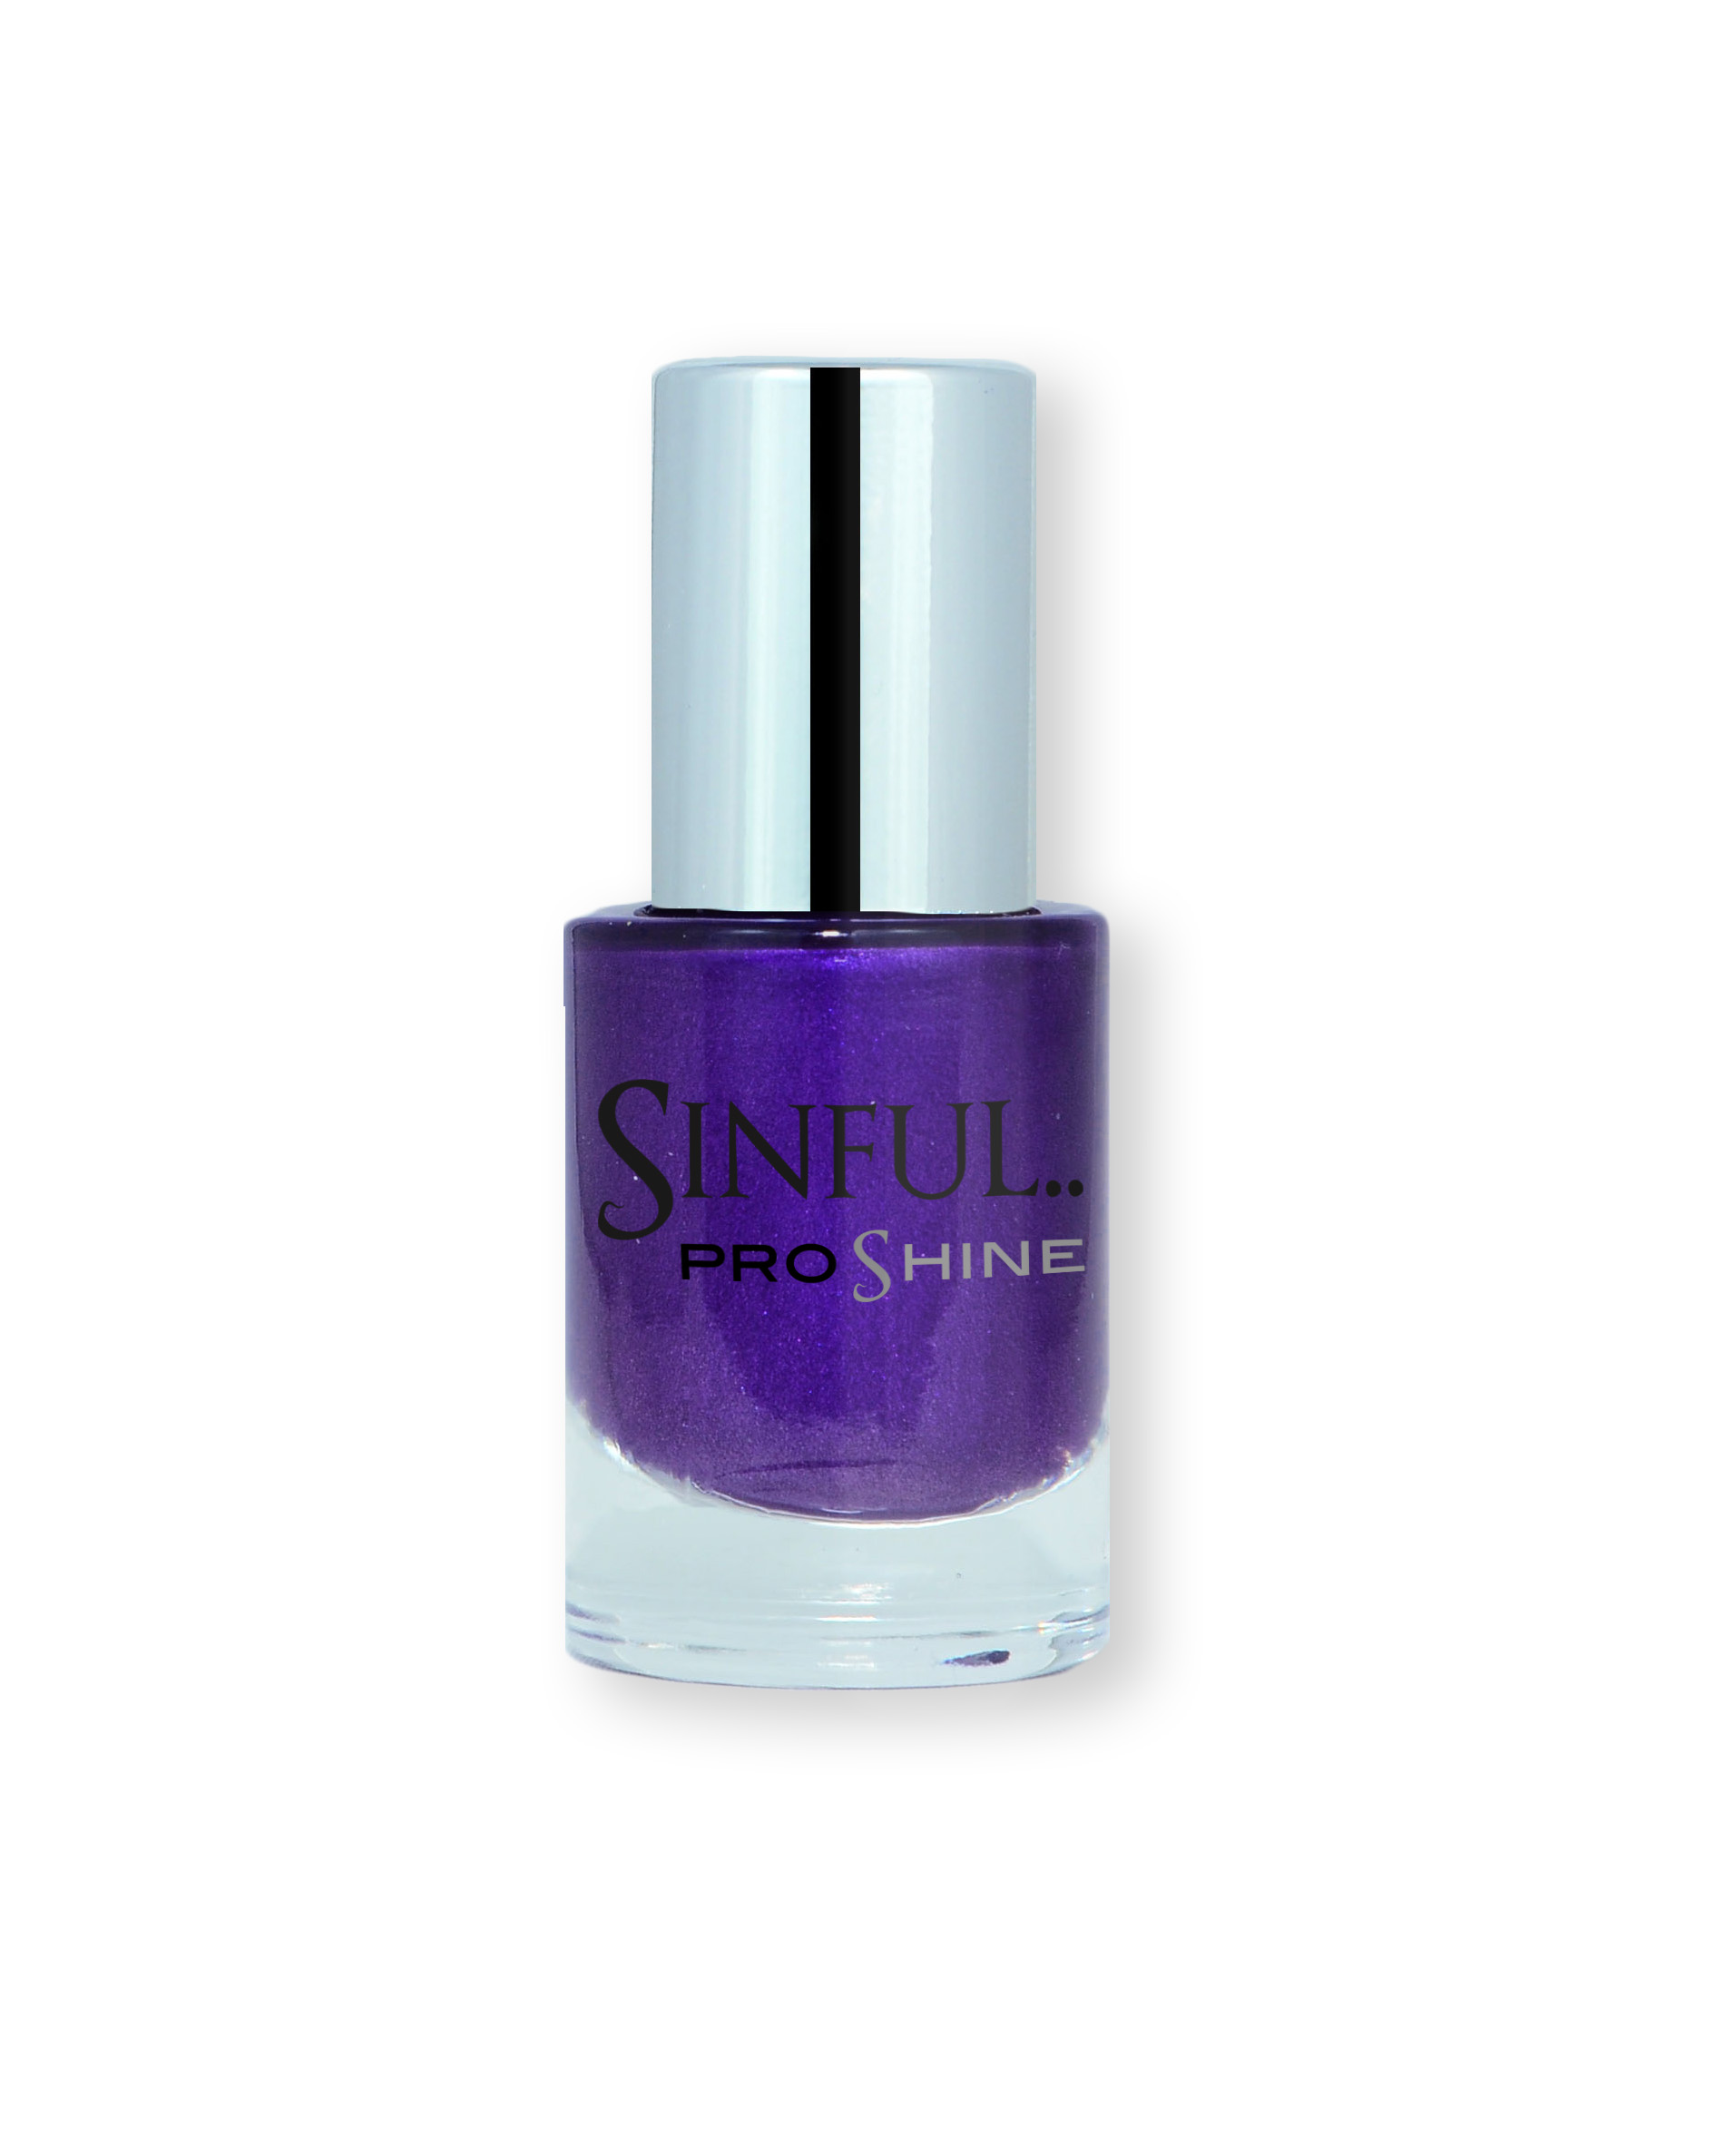 Sinful PROshine is a revolution into top spec imitation gel-like formula, easy application, full coverage and a sleek finish. Spoil yourself with the choice of 42 shades, expertly formulated with the finest grade of pigments. Show Off: Luxurious dark purple pearl